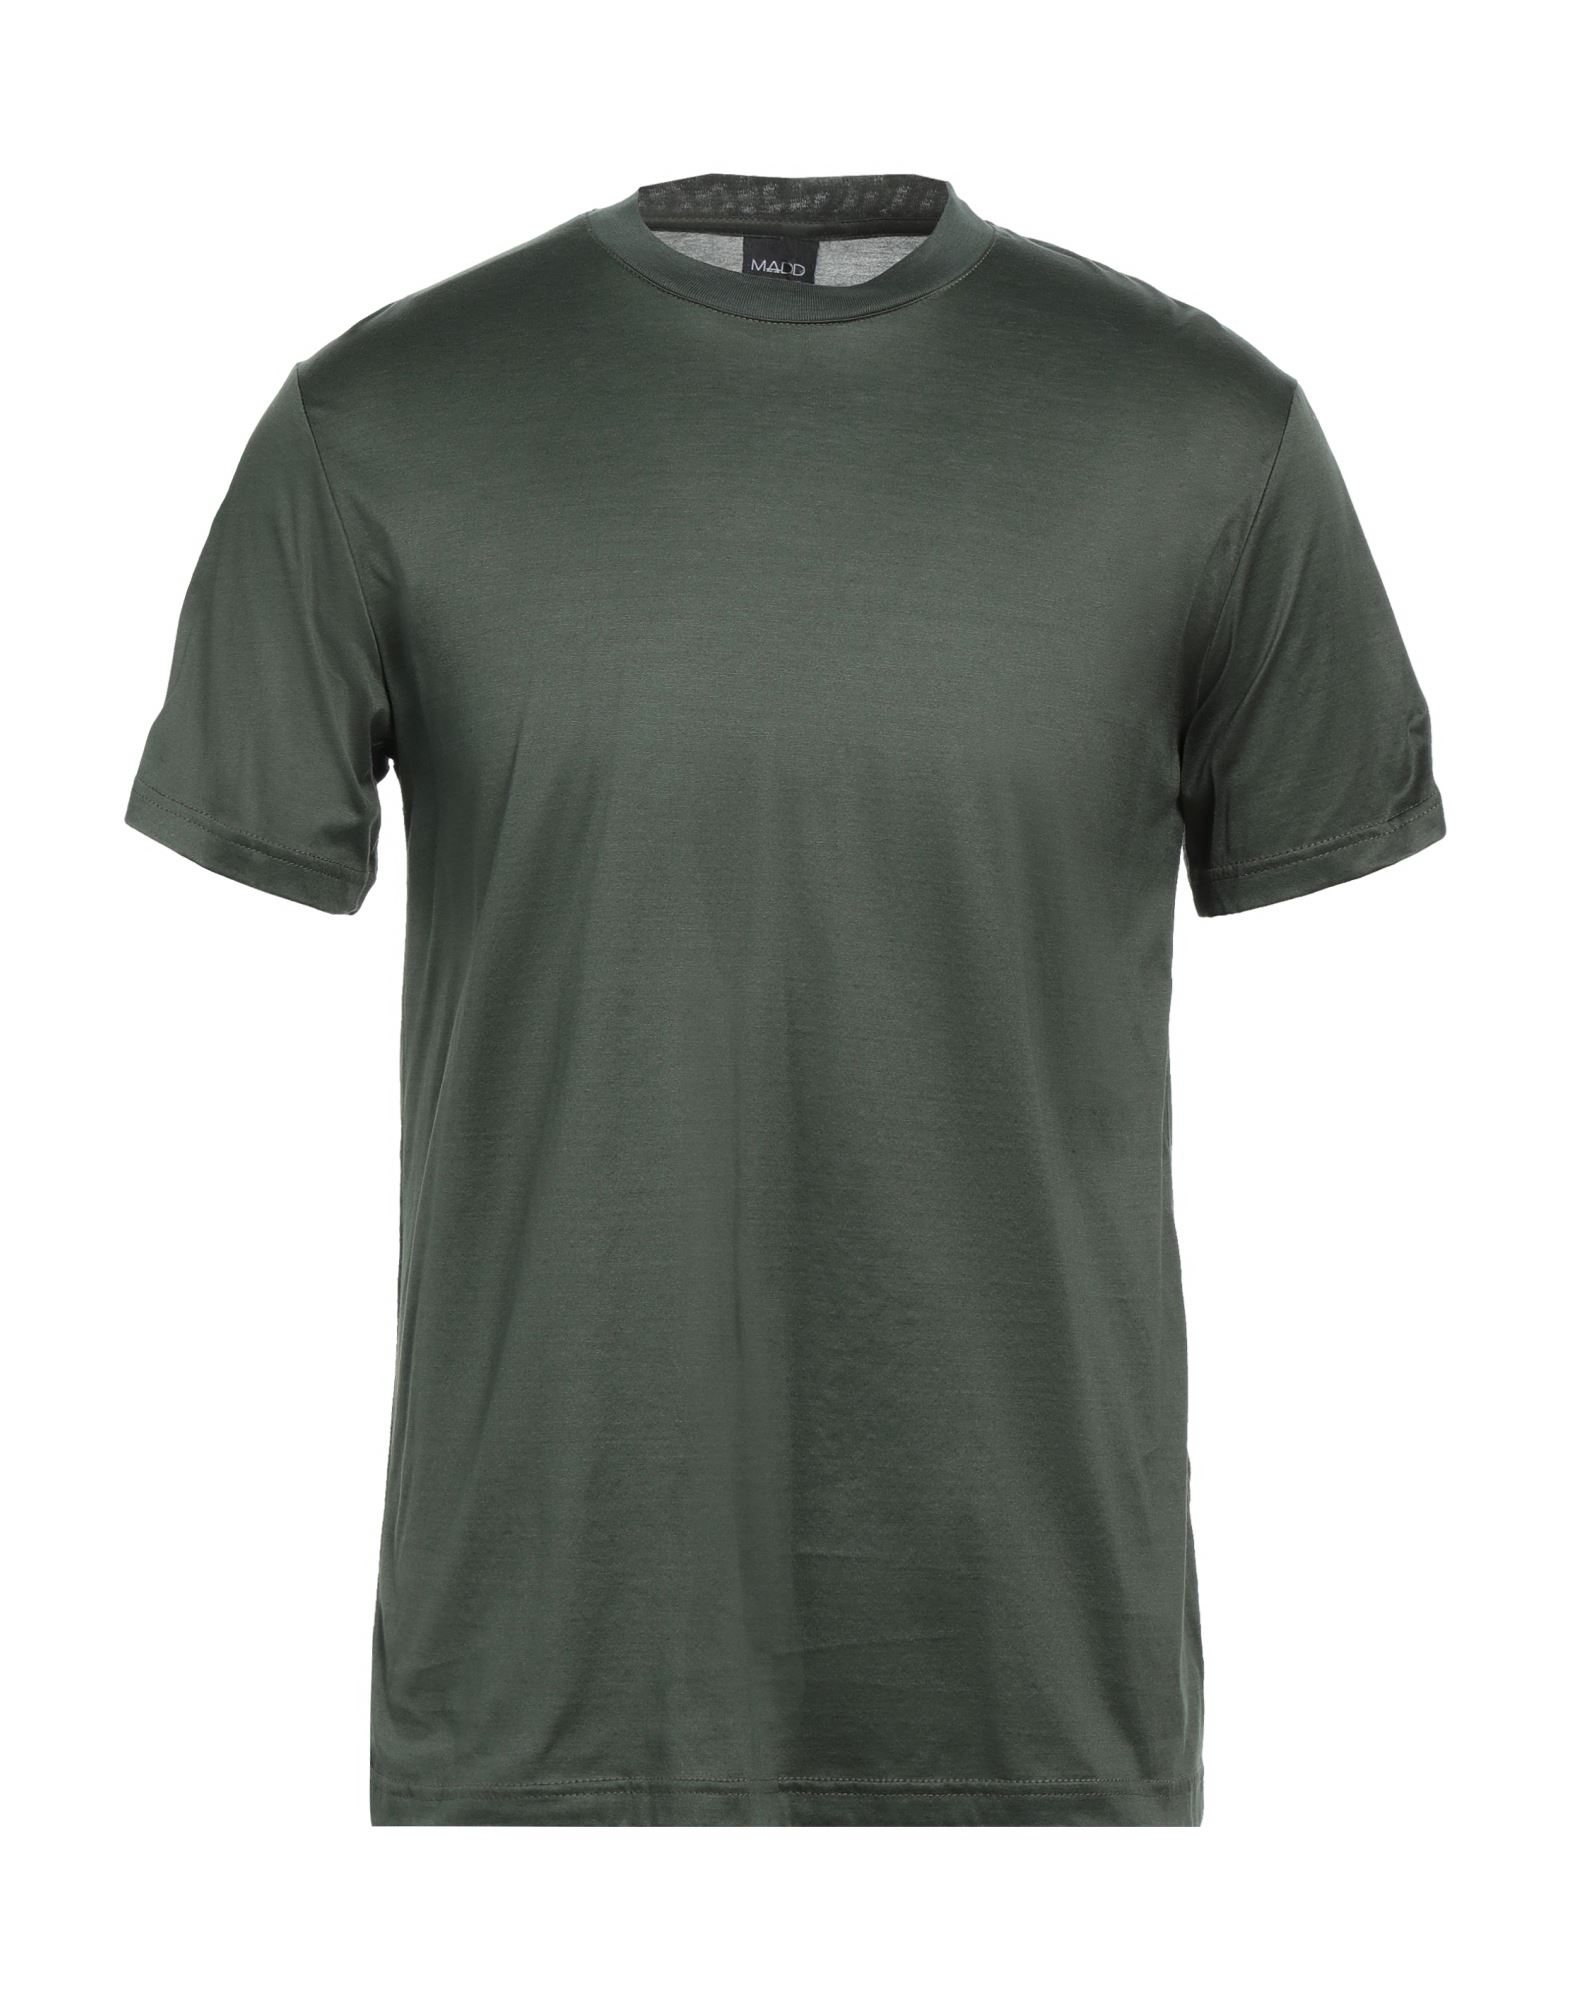 Madd T-shirts In Military Green